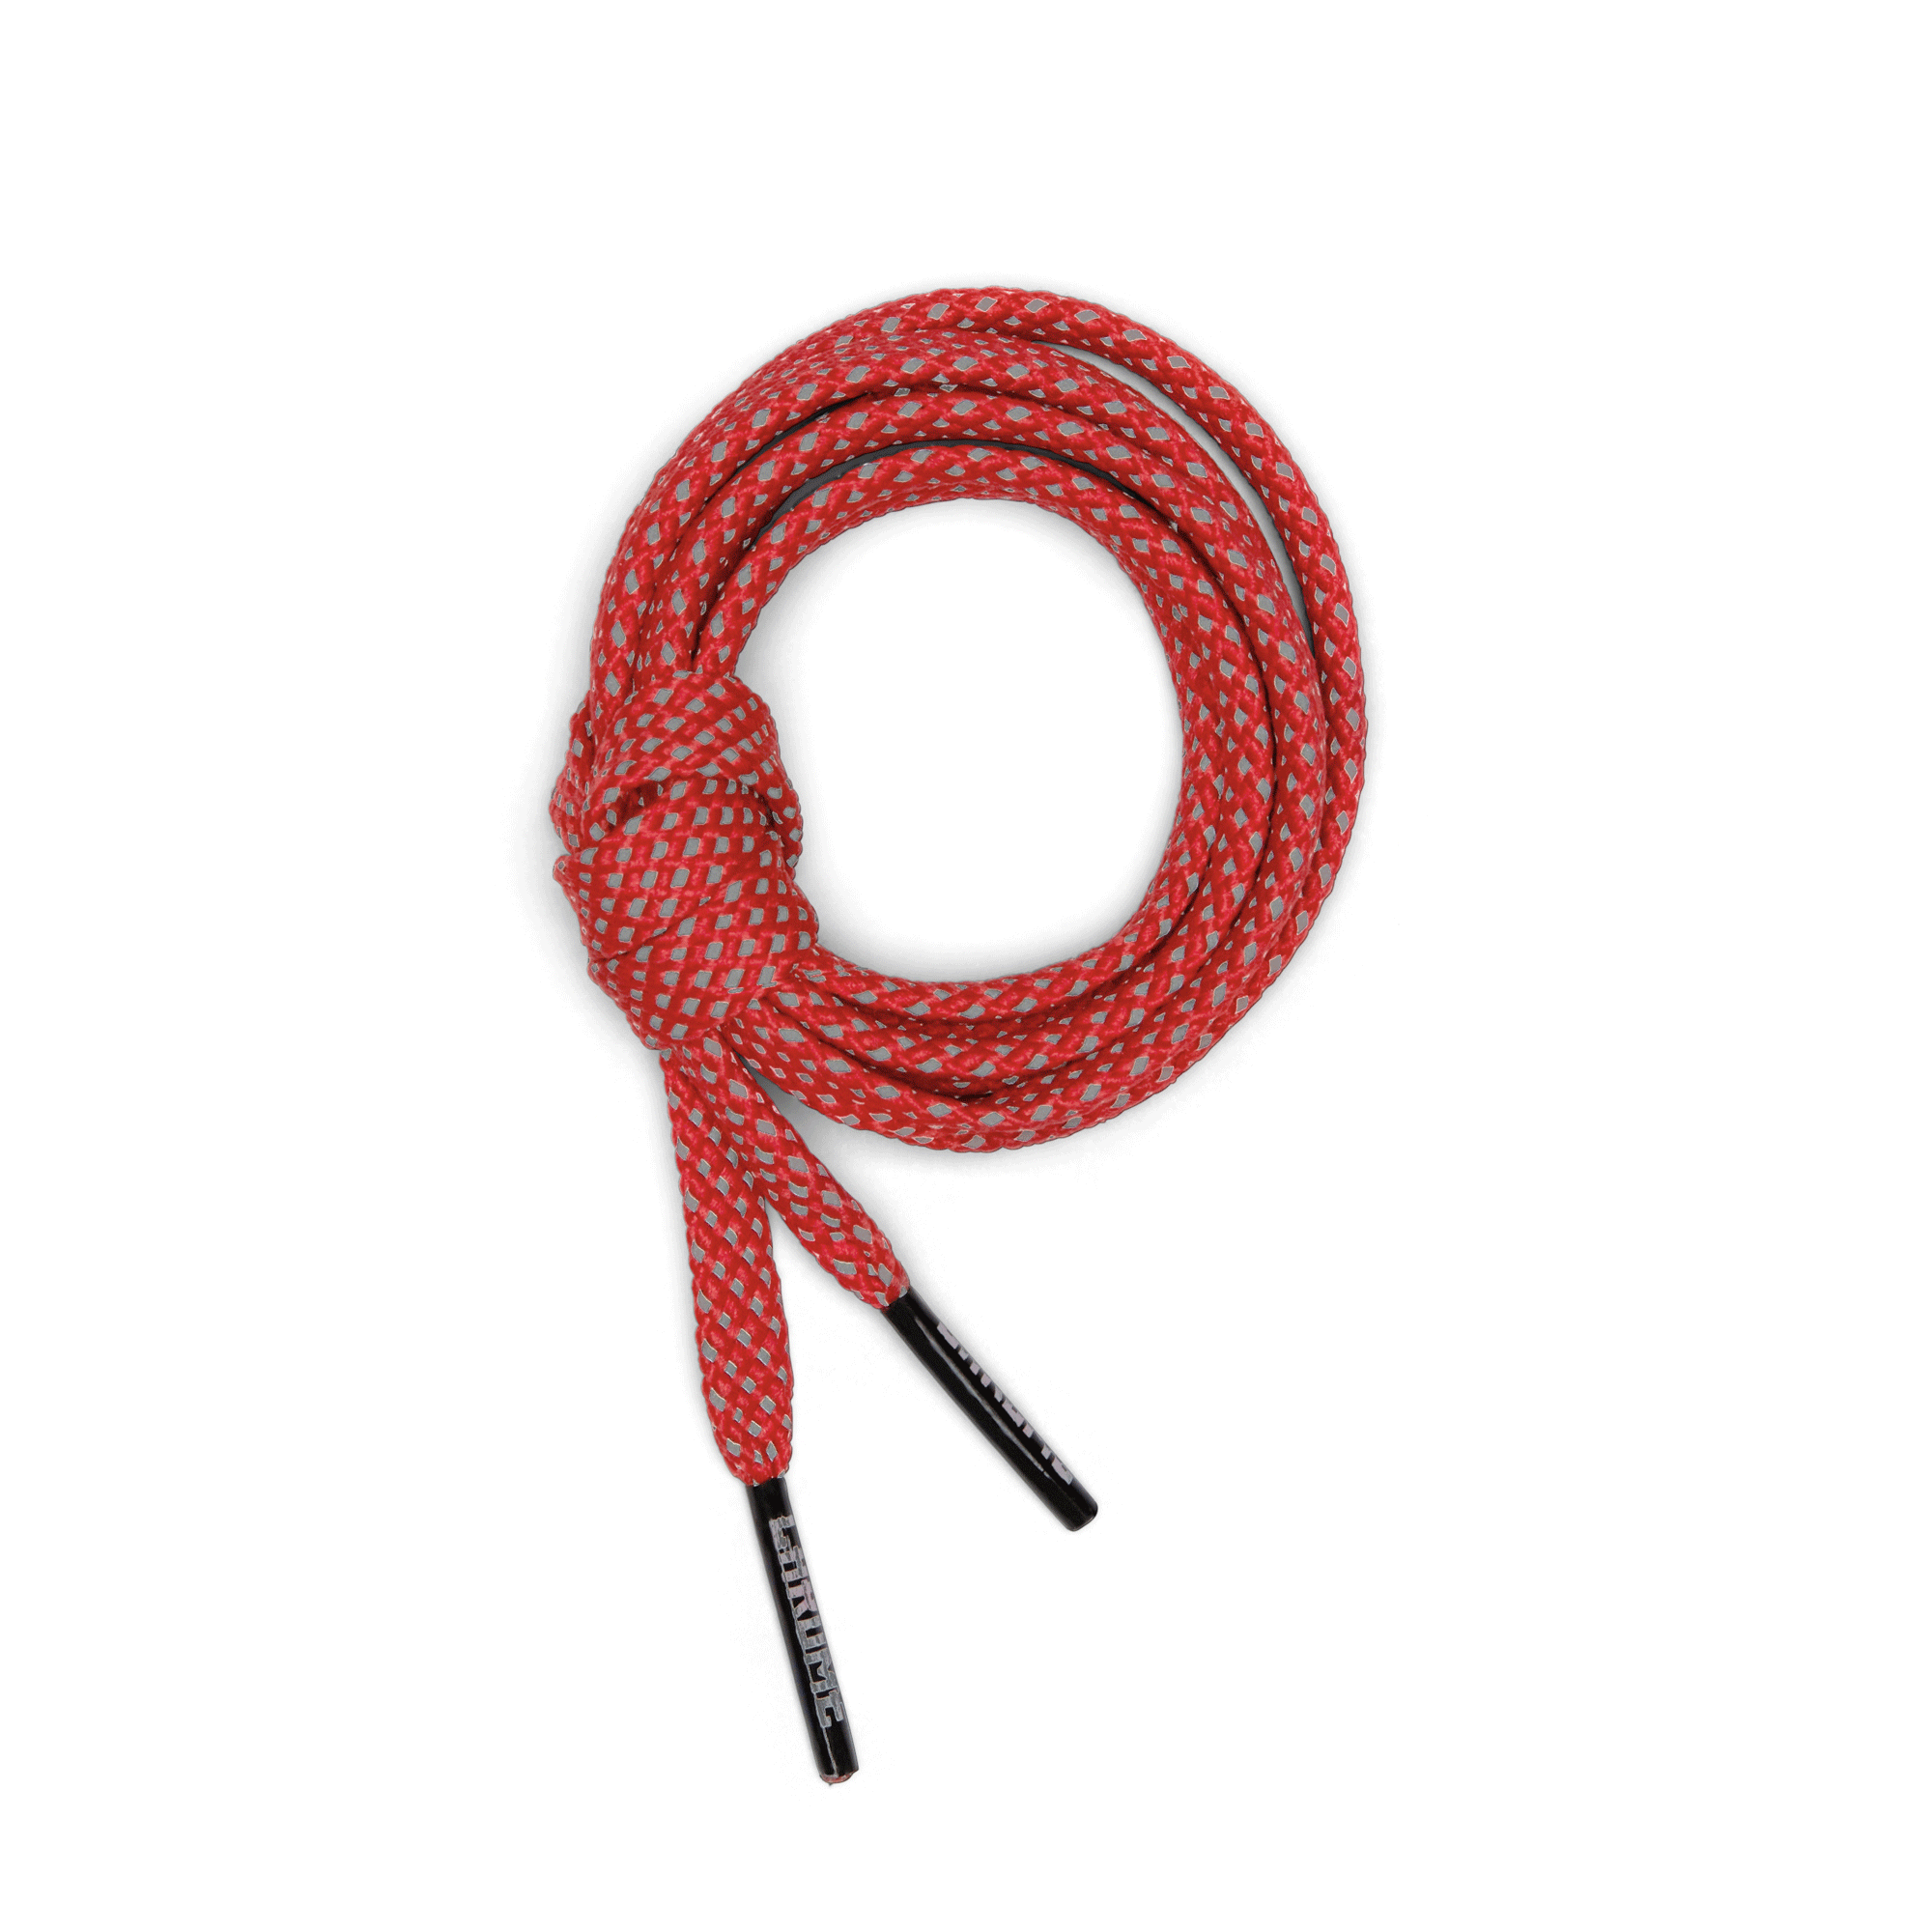 Reflective Flat Shoe Laces in red showing reflectivity #color_red reflective